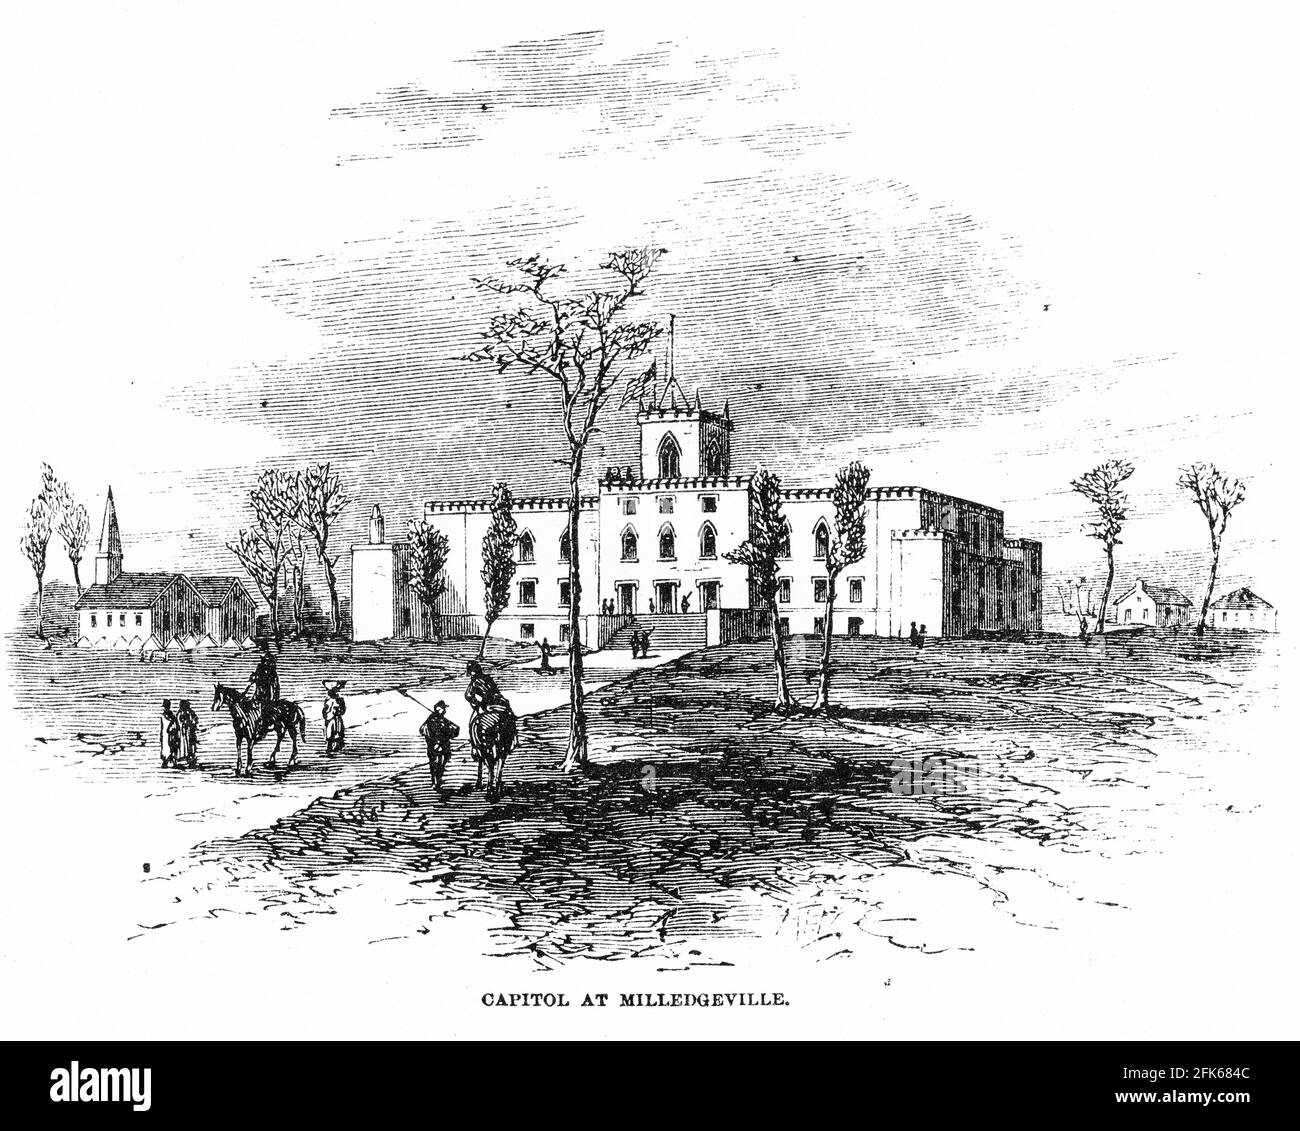 Engraving of the capitol at Milledgeville during American civil war: Stock Photo